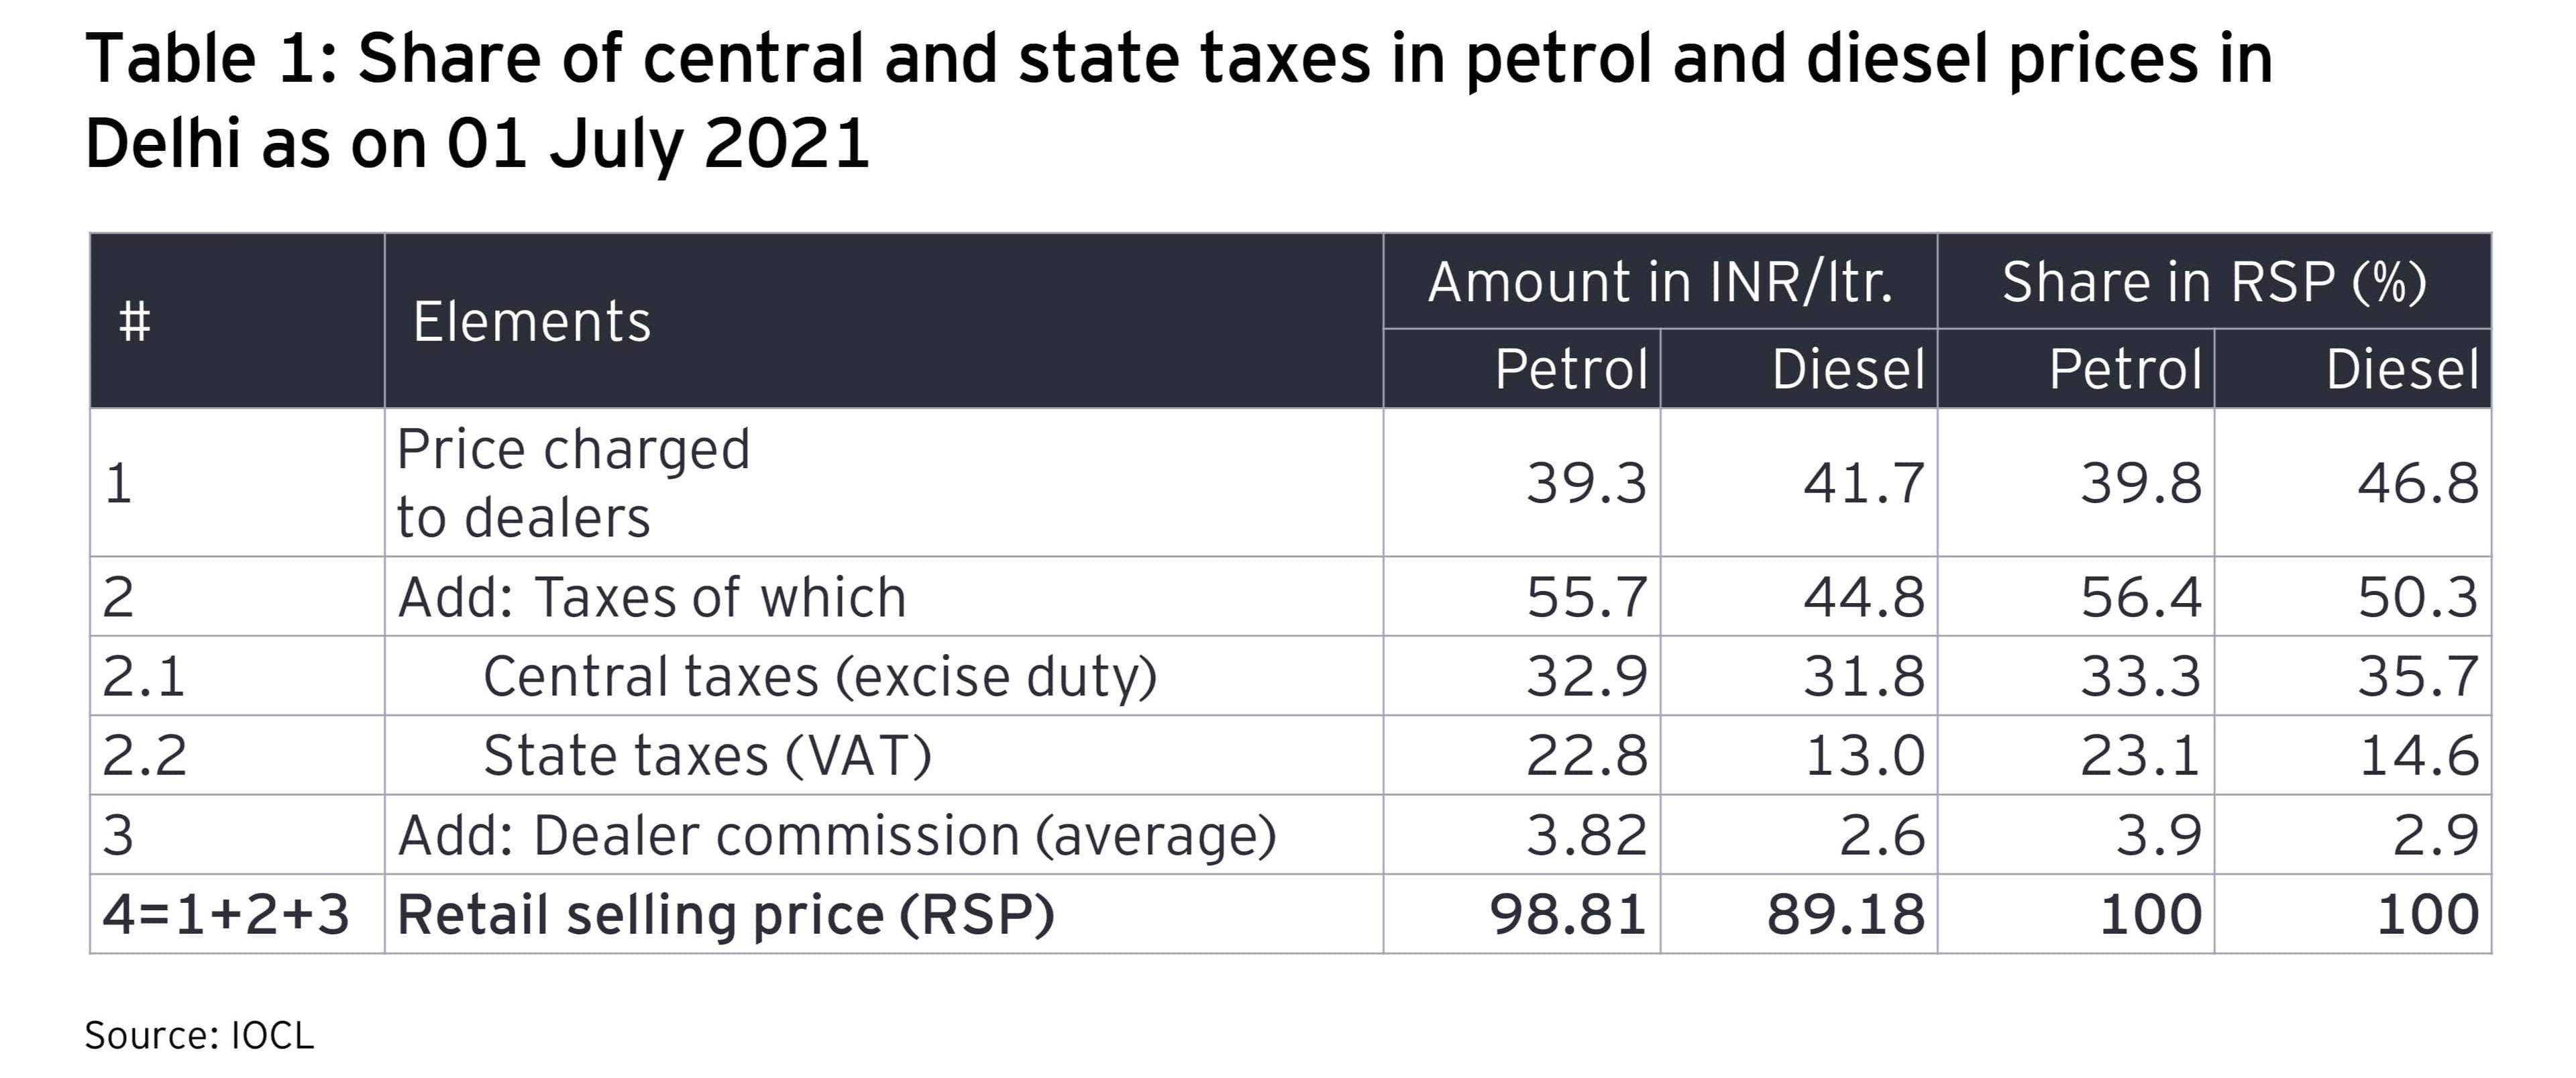 Share of central and state taxes in petrol and diesel prices in Delhi as on 01 July 2021